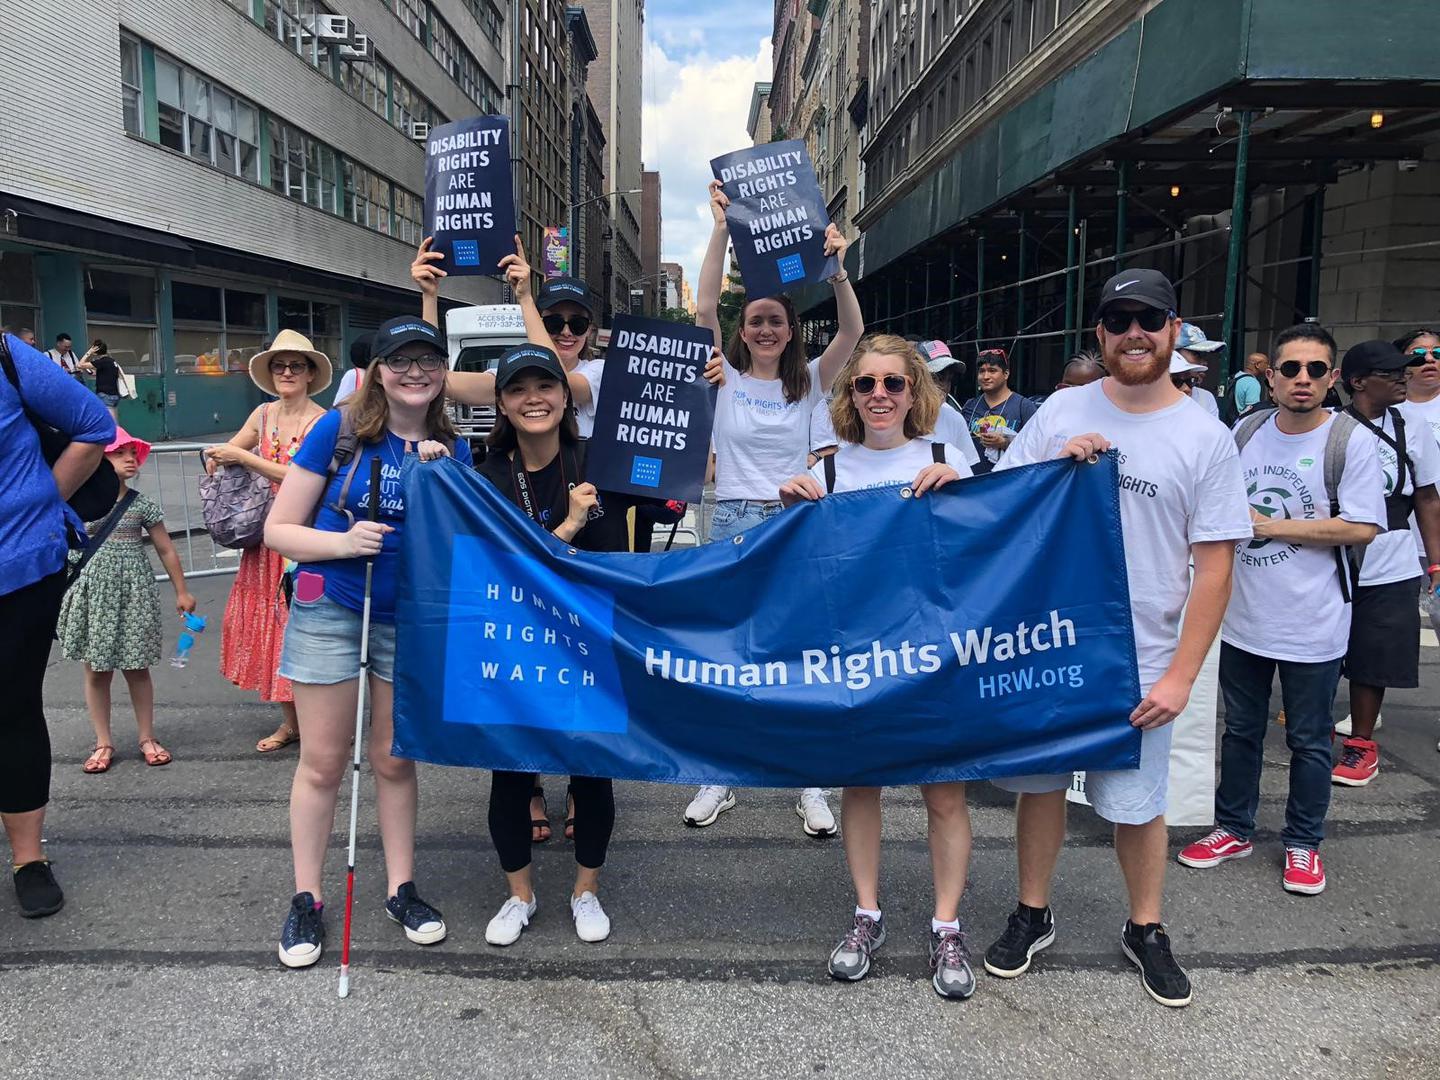 Marching for Disability Rights in New York City